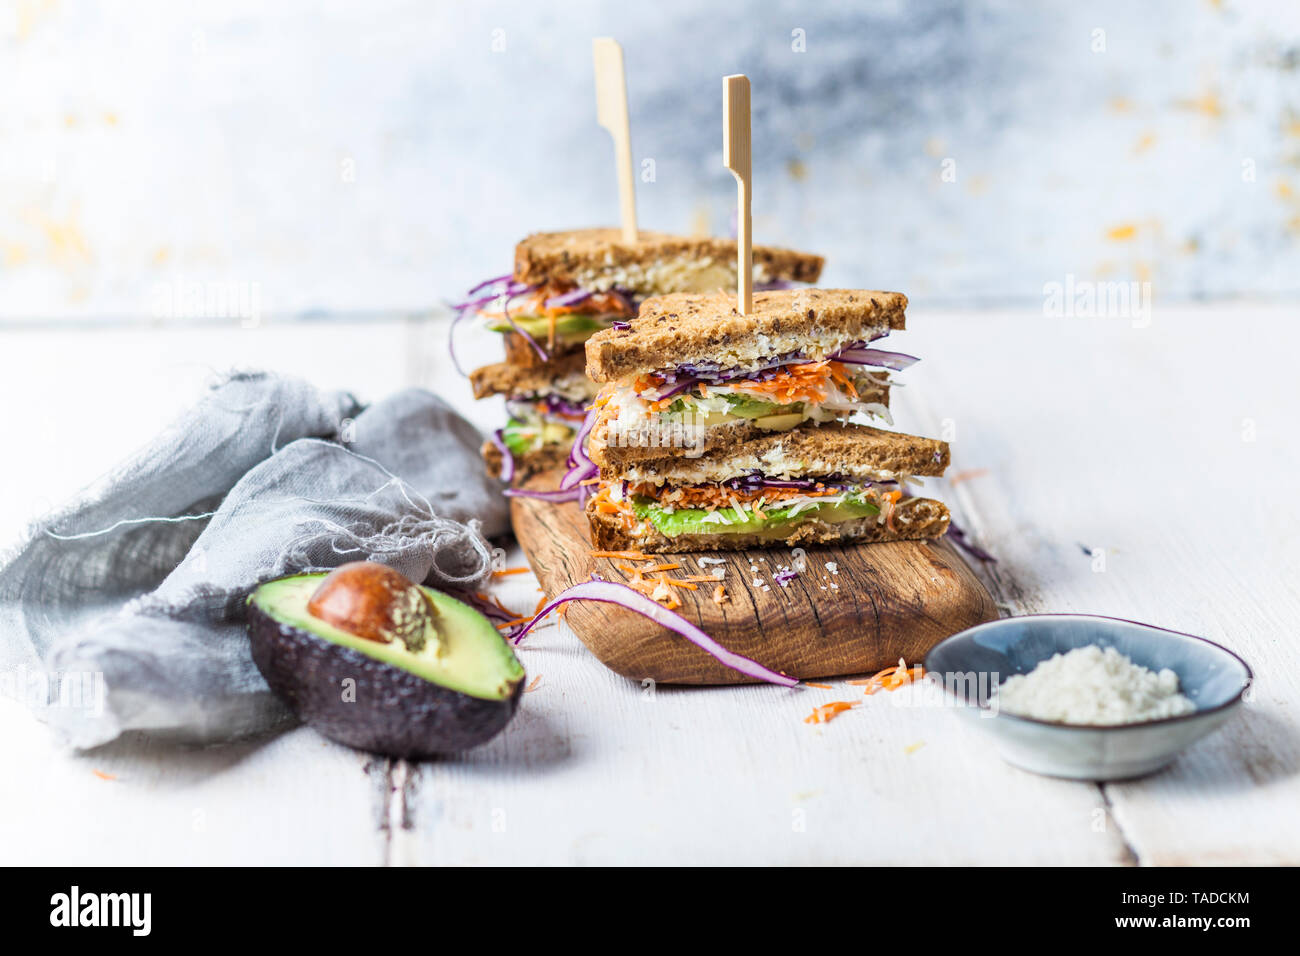 Veggie Sandwich, whole meal toast bread with grated carrot, red cabbage, white cabbage, avocado and cheese Stock Photo